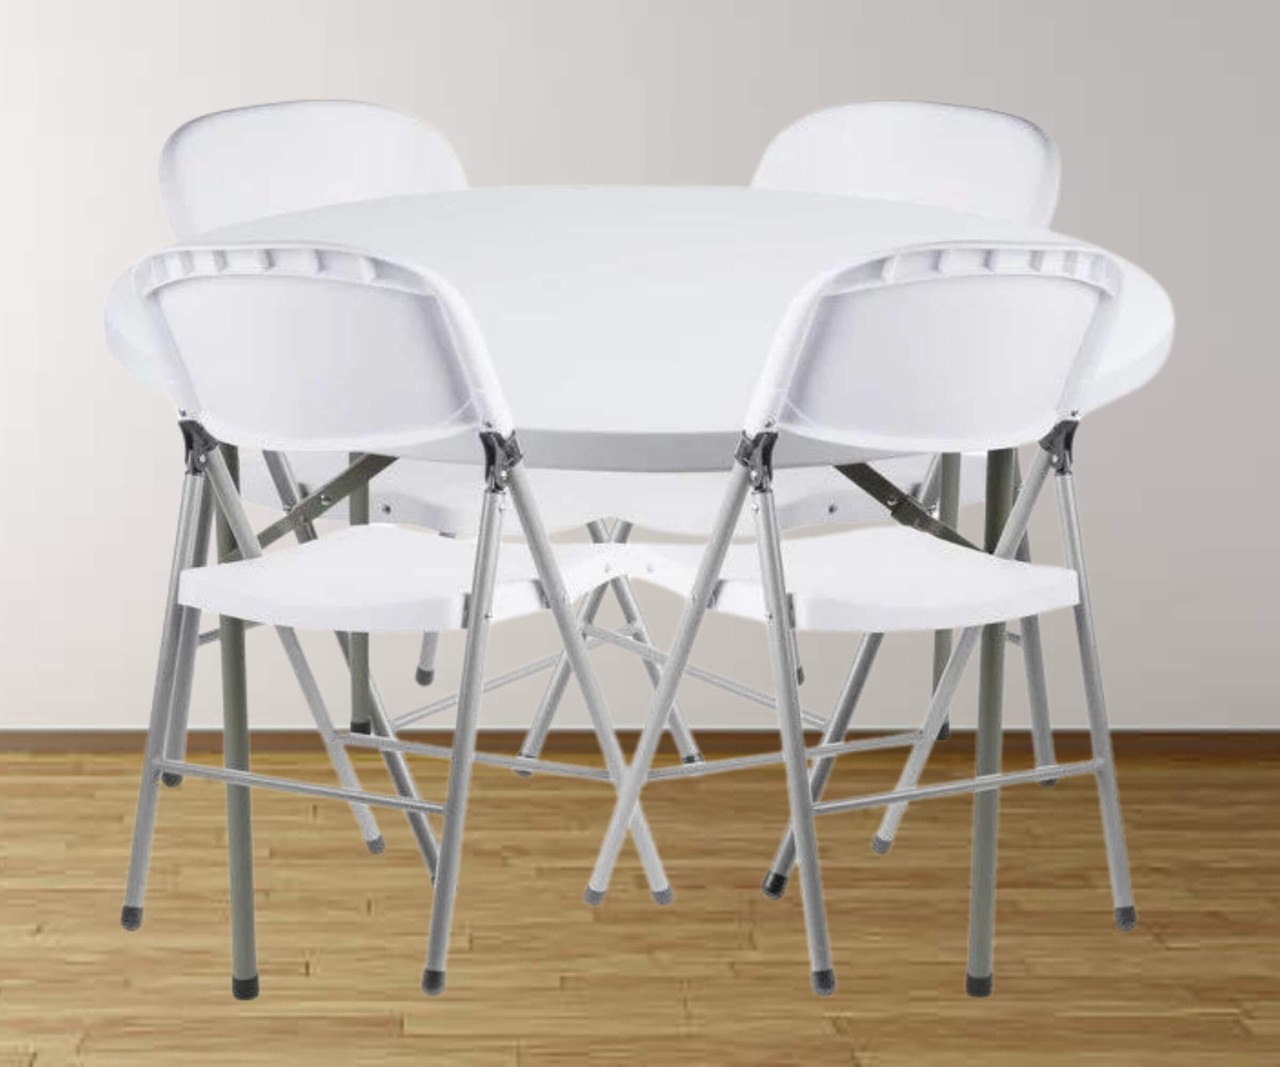 CP Round Granite White Heavy-Duty Blow Molded Plastic Folding Table with 4 White Folding Chairs 48"| Compact Seating Solution for Roundtable Events- Chicken Pieces